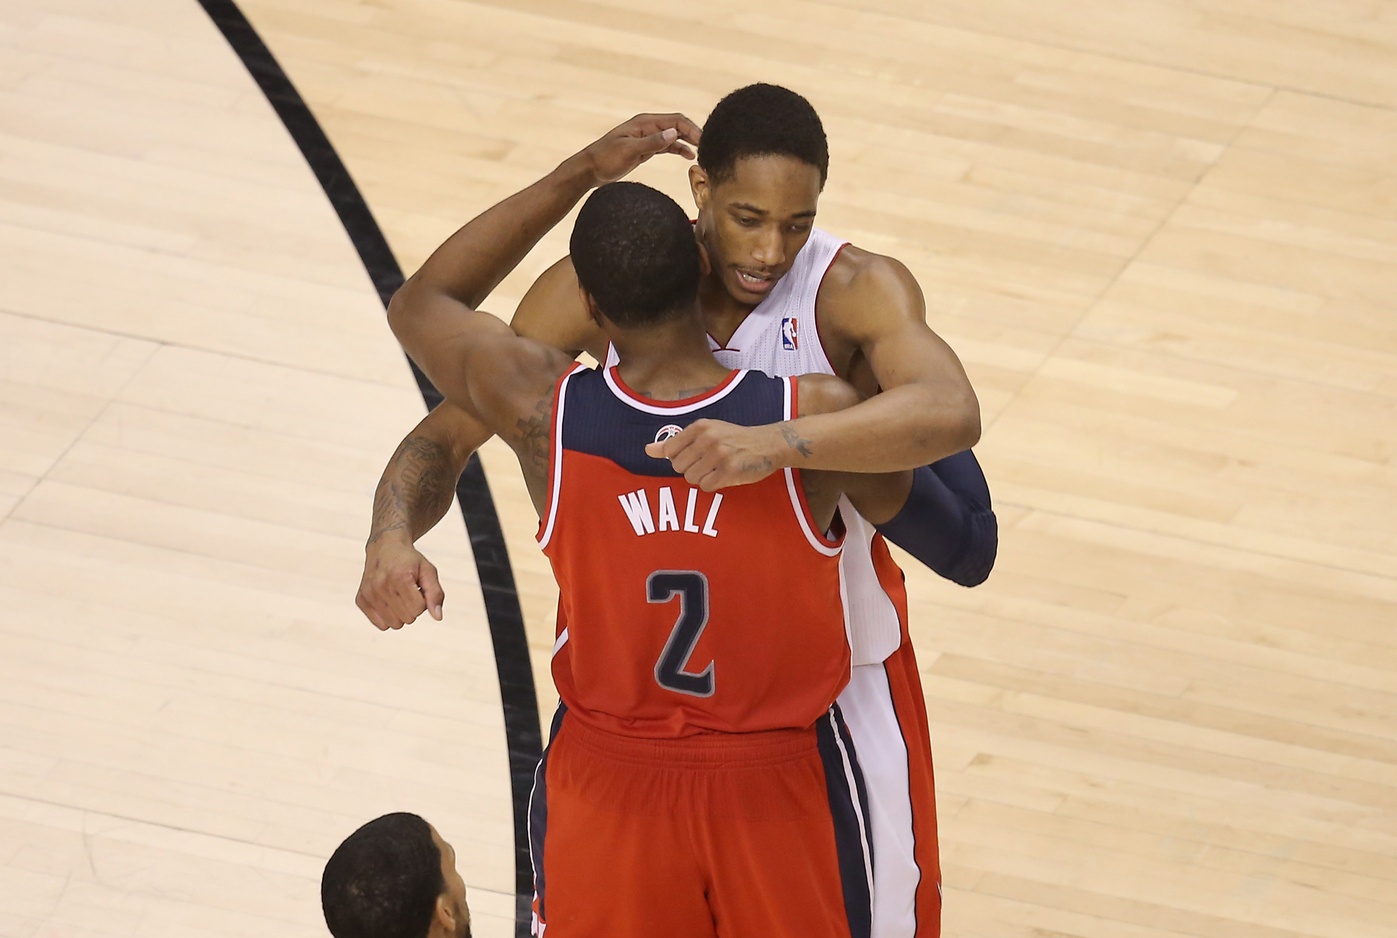 John Wall and DeMar DeRozan congratulate each other after withstanding a triple-overtime game. Photo via Tom Szczerbowski